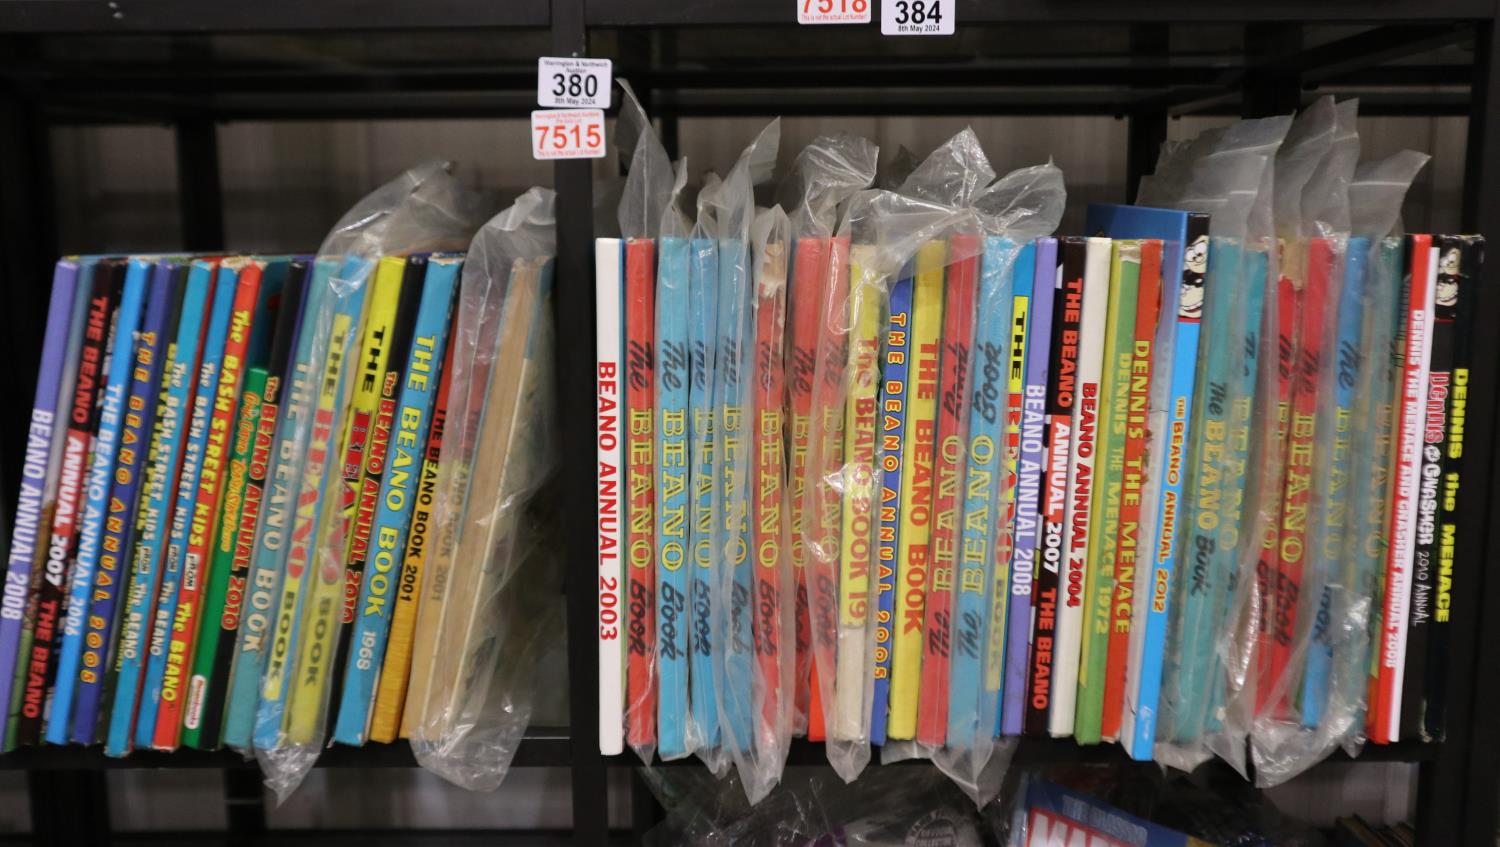 Two shelves of Beano annuals. Not available for in-house P&P